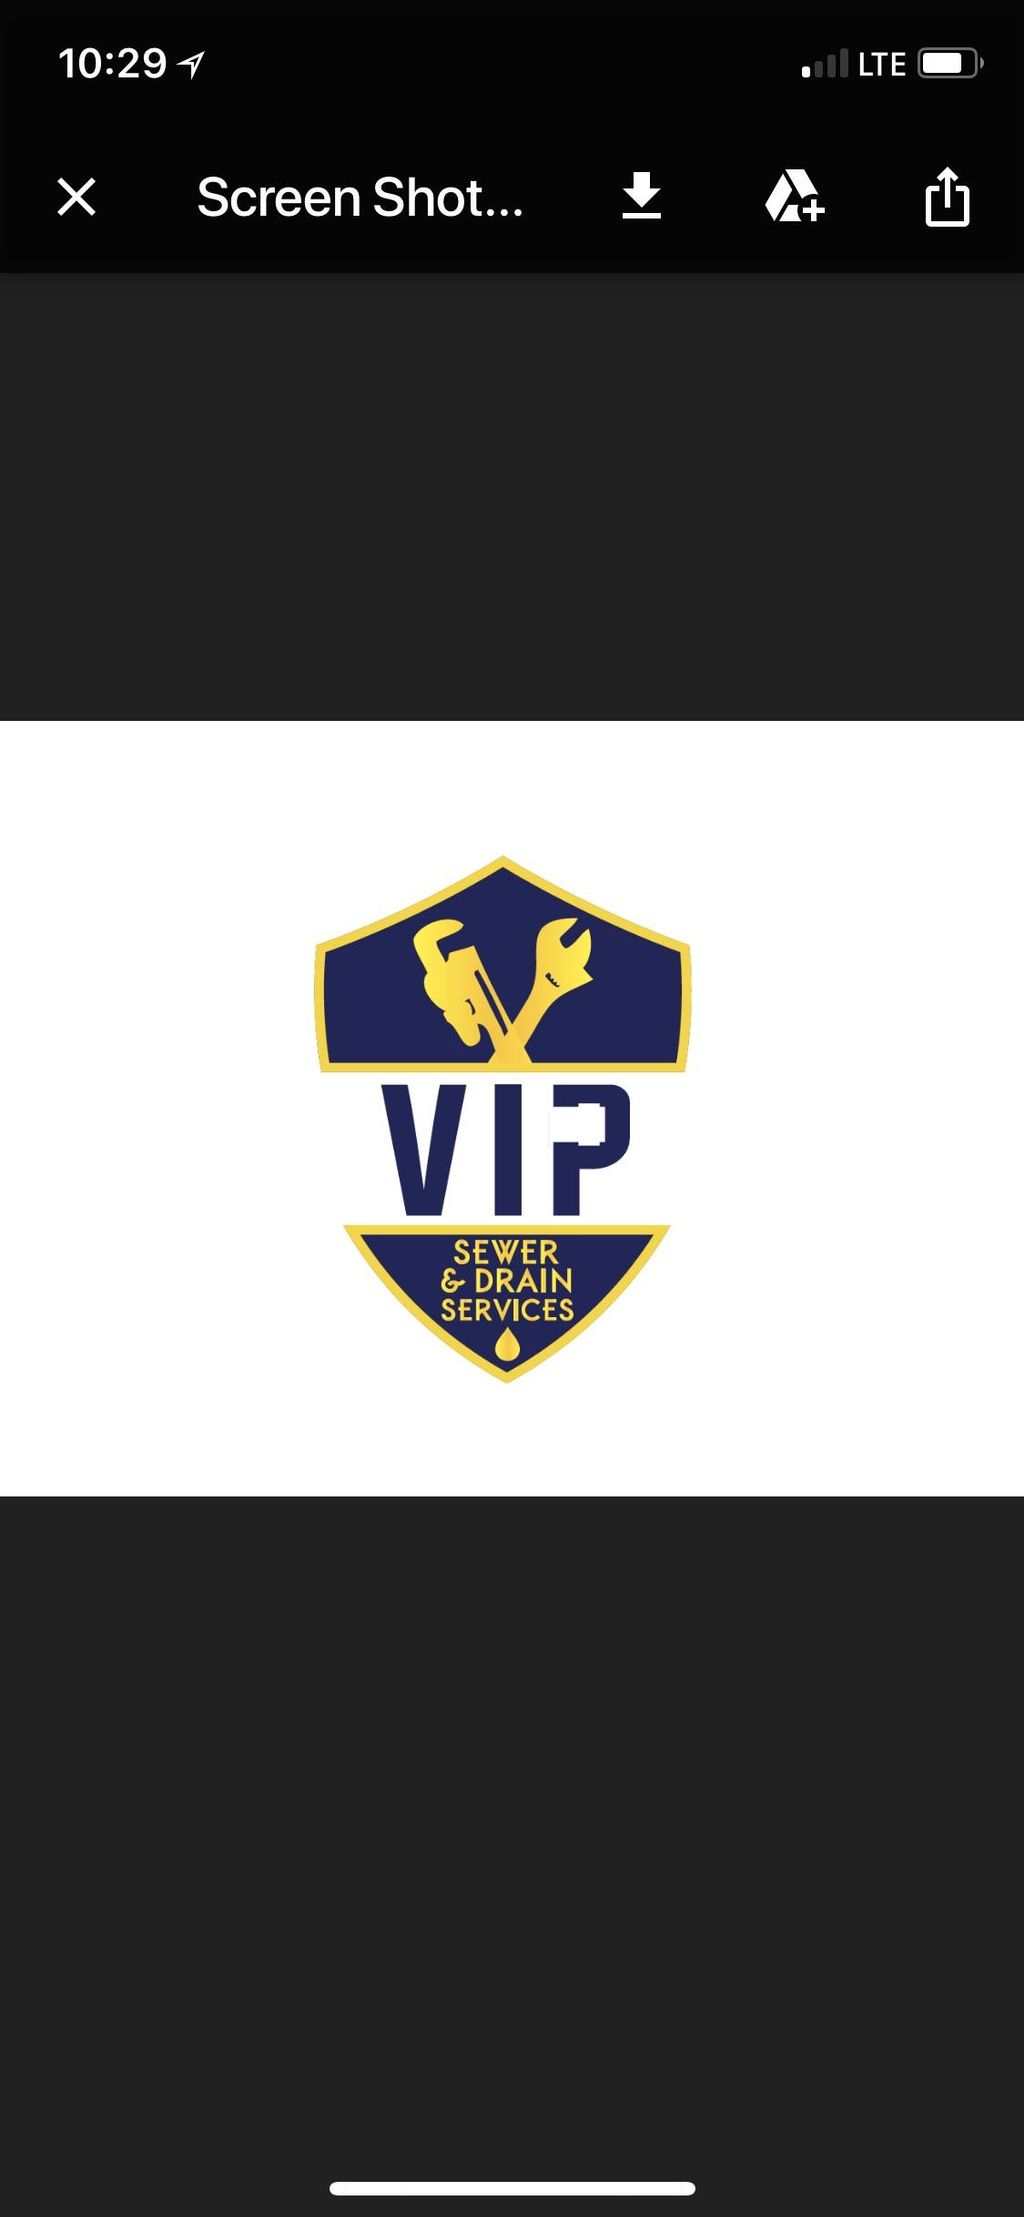 VIP Sewer And Drain Services